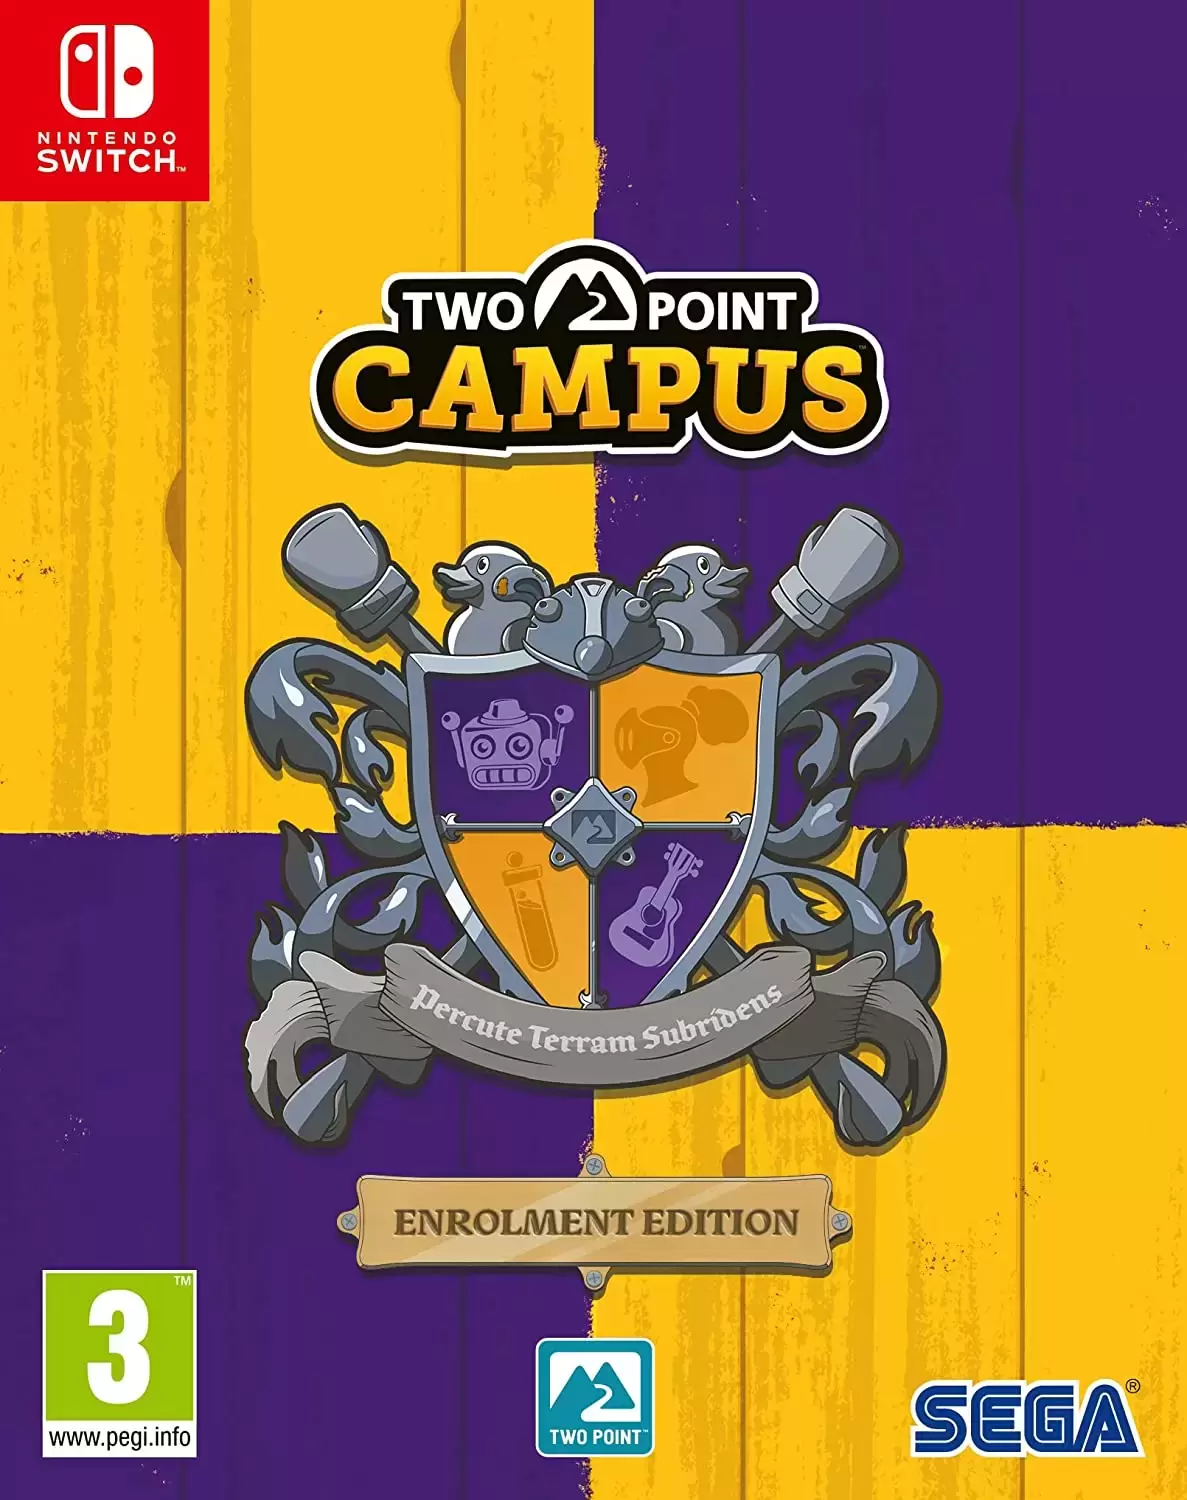 Jeux Nintendo Switch - Two Point Campus (Enrolment Edition)